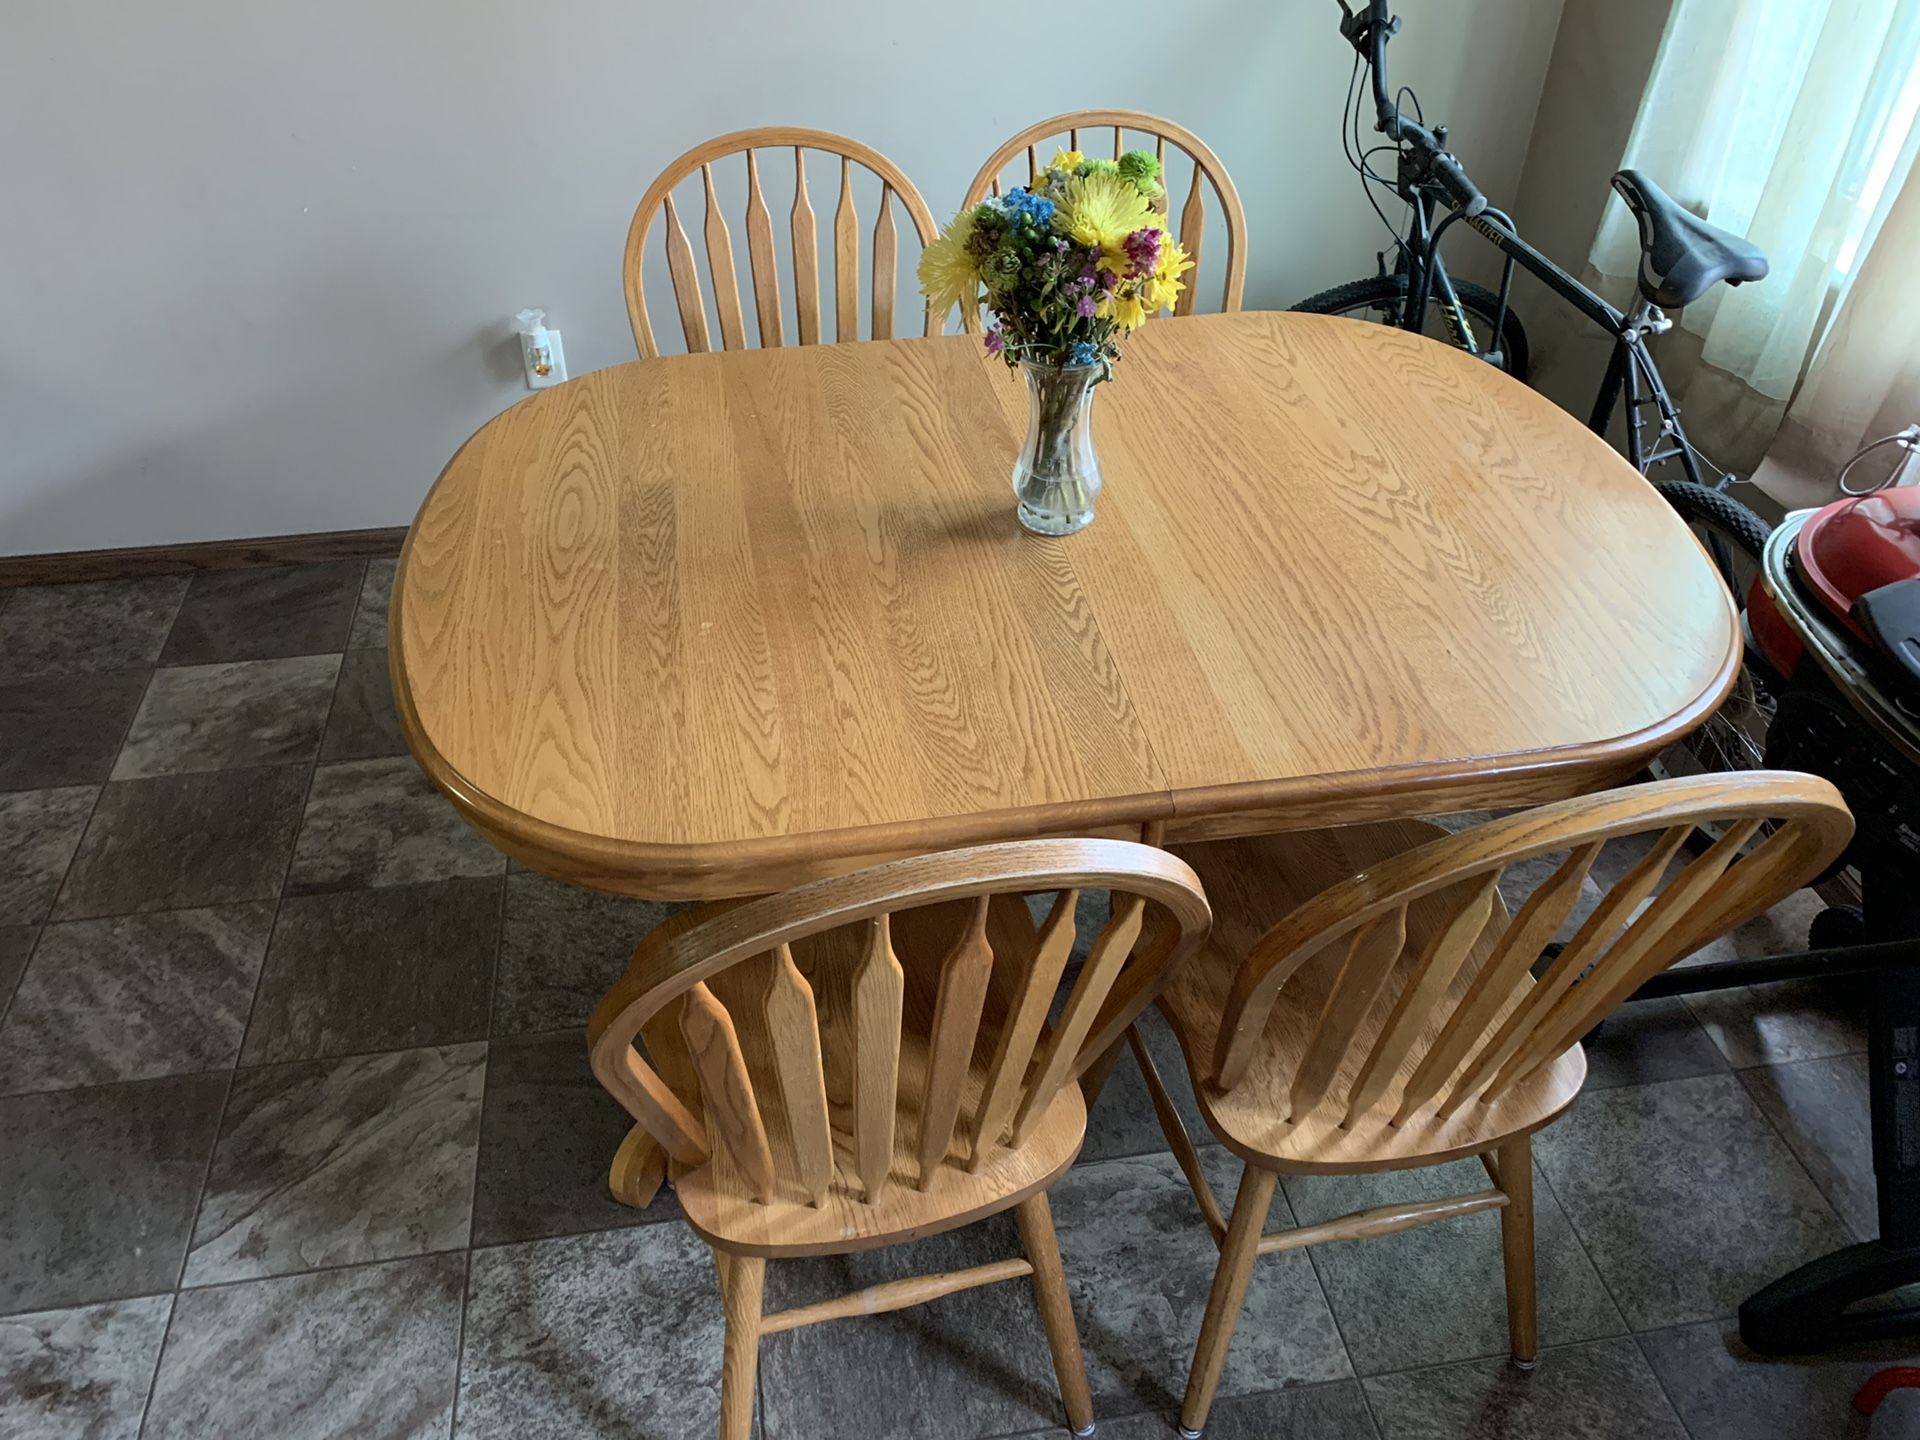 Solid Oak table with chairs and leaf